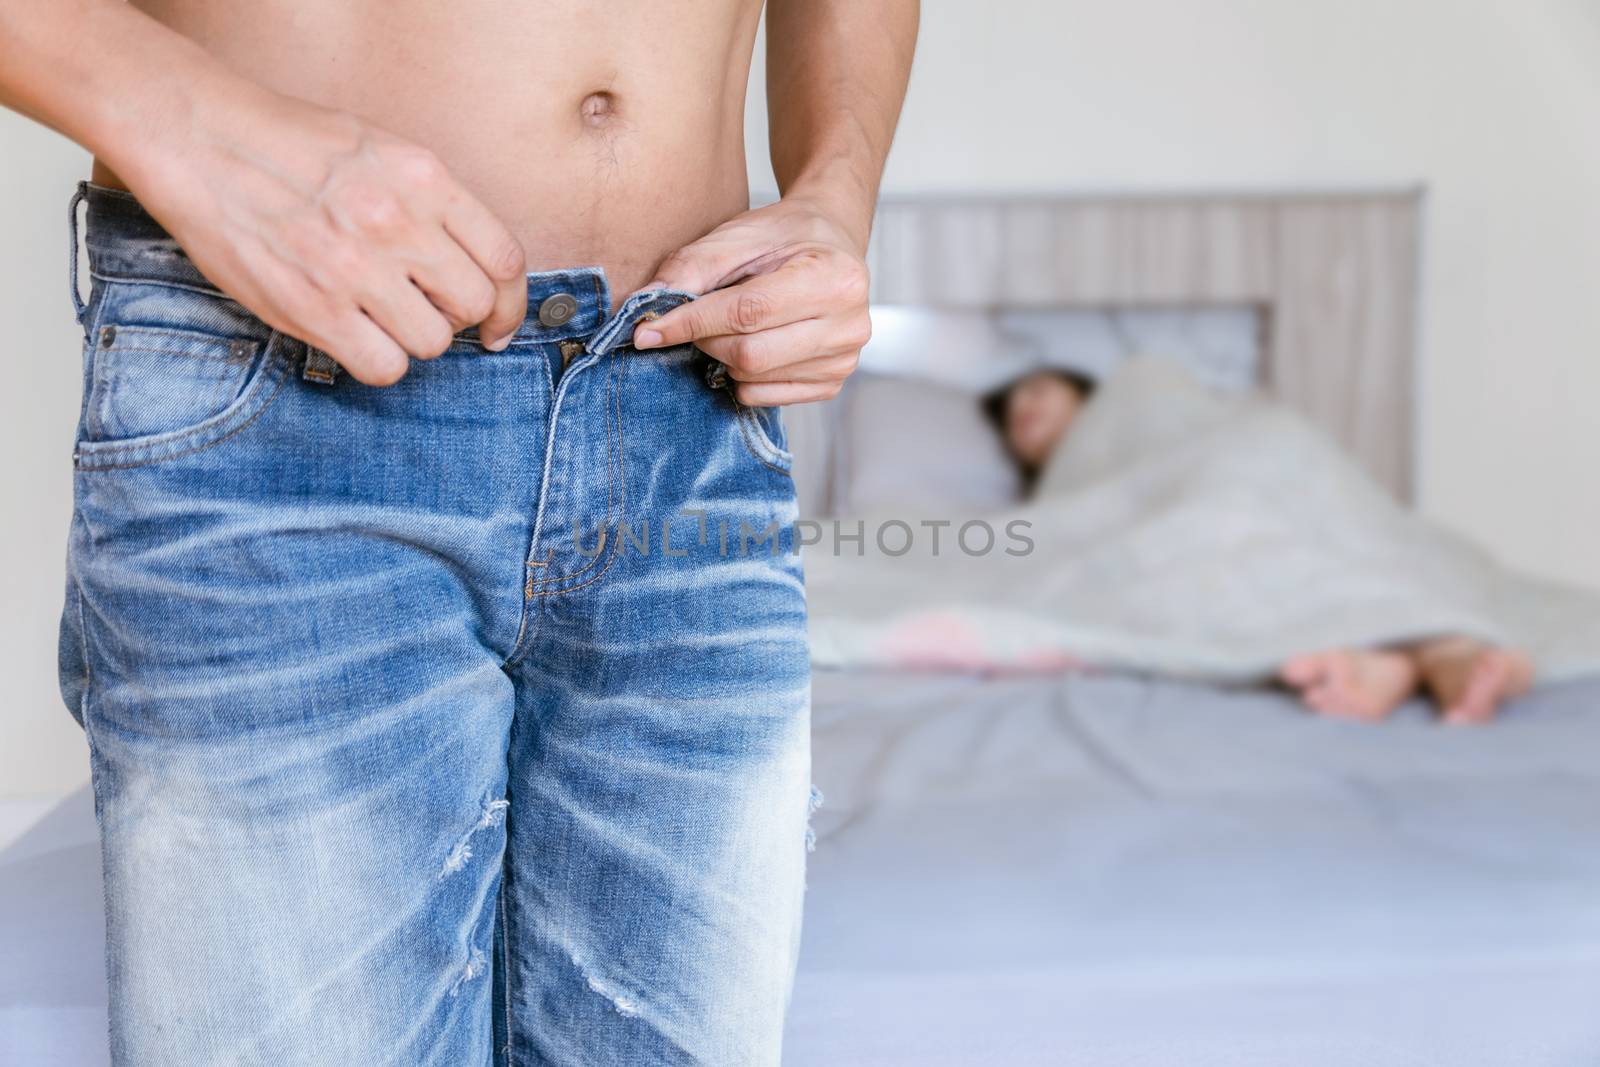 Men are taking off their pants to have of couple in bedroom is having sex.